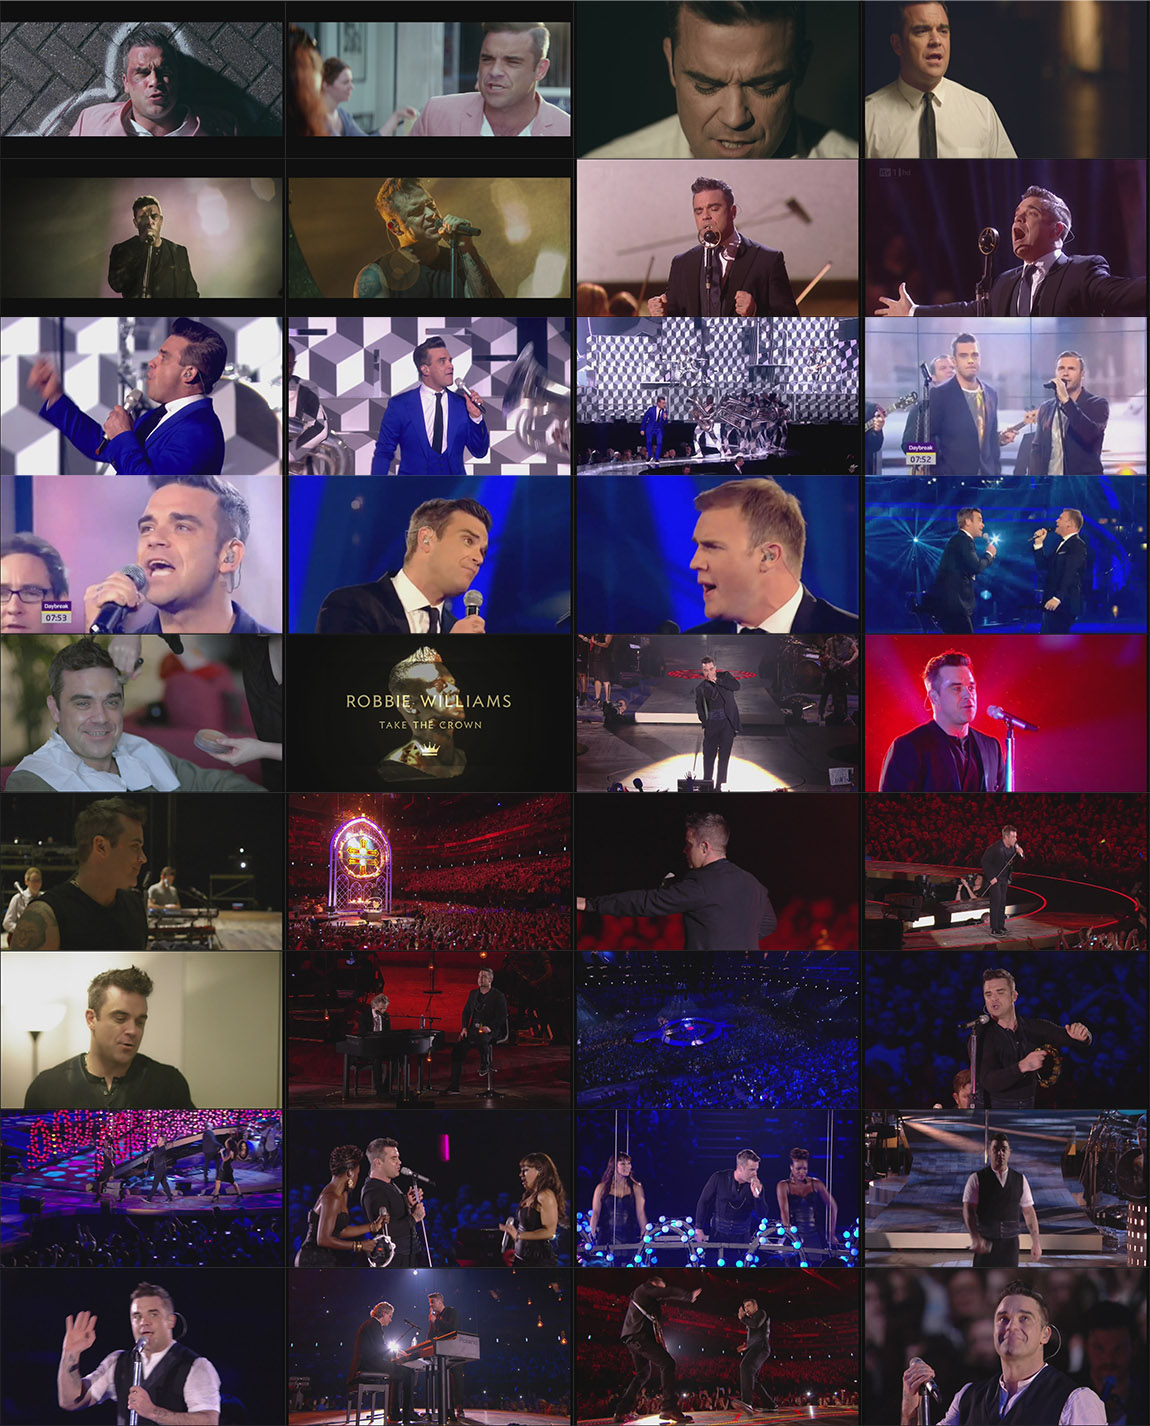 DVD ROBBIE WILLIAMS TAKE THE CROWN LIVE AT LONDON O2 2012 CAPTURES